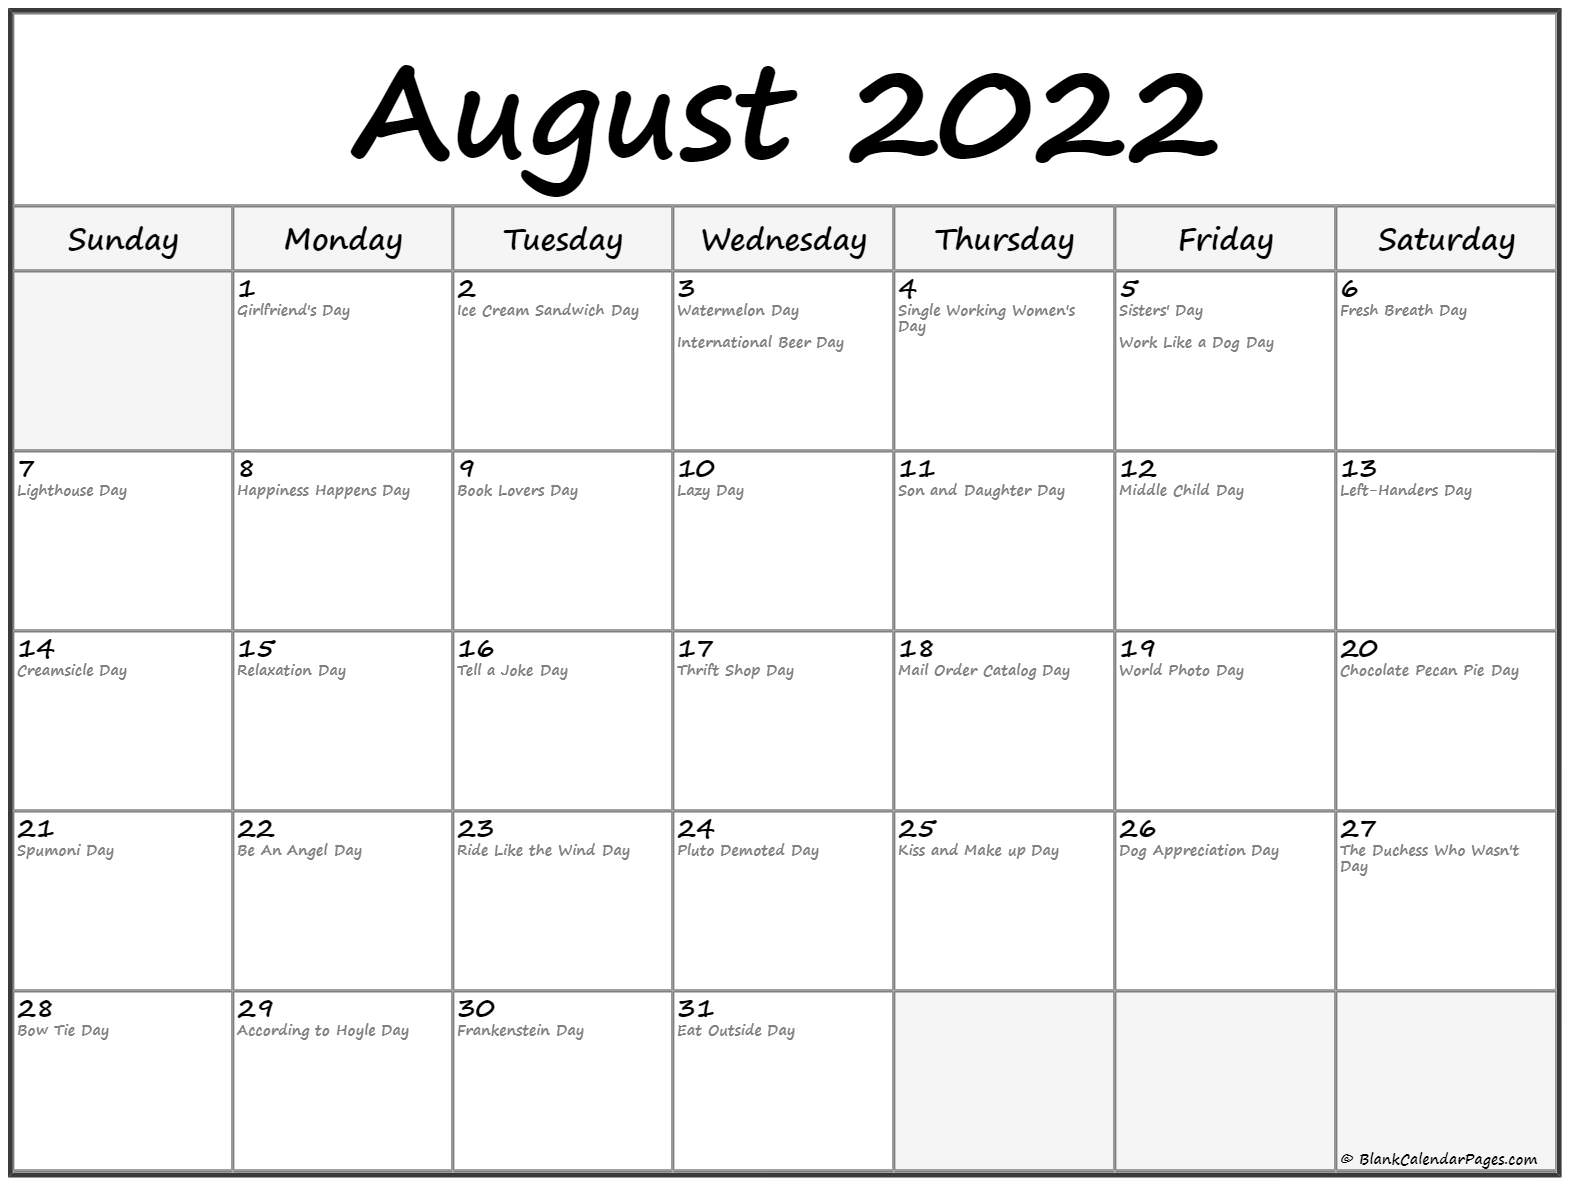 37+ Calendar 2022 August Bank Holiday Pics - All In Here